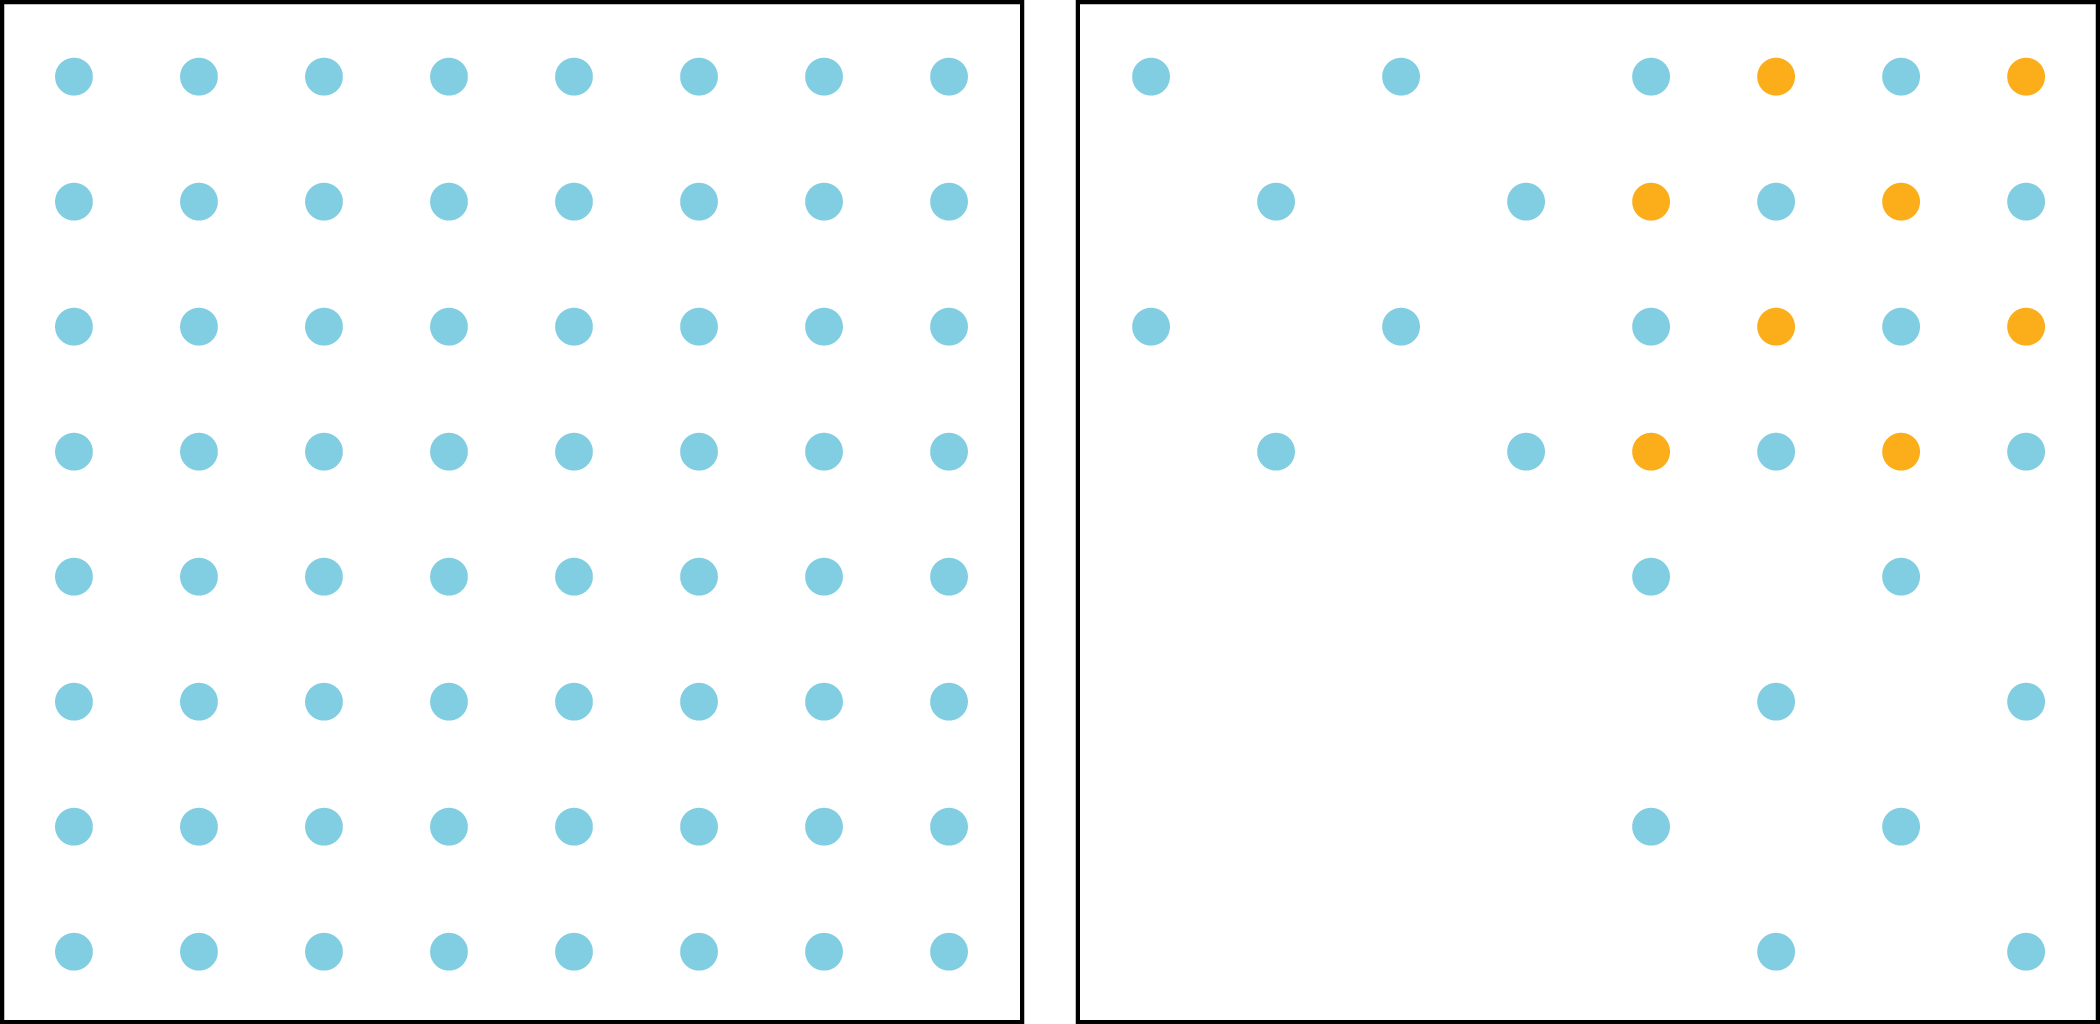 Two equal sized squares with an array of dots inside each. The left square contains an 8 by 8 array of dots. In the right square, the array of dots are as follows: Row 1: 4 blue dots, 2 yellow dots. Row 2: 4 blue dots, 2 yellow dots. Row 3: 4 blue dots, 2 yellow dots. Row 4: 4 blue dots, 2 yellow dots. Row 5: 2 blue dots. Row 6: 2 blue dots. Row 7: 2 blue dots. Row 8: 2 blue dots.